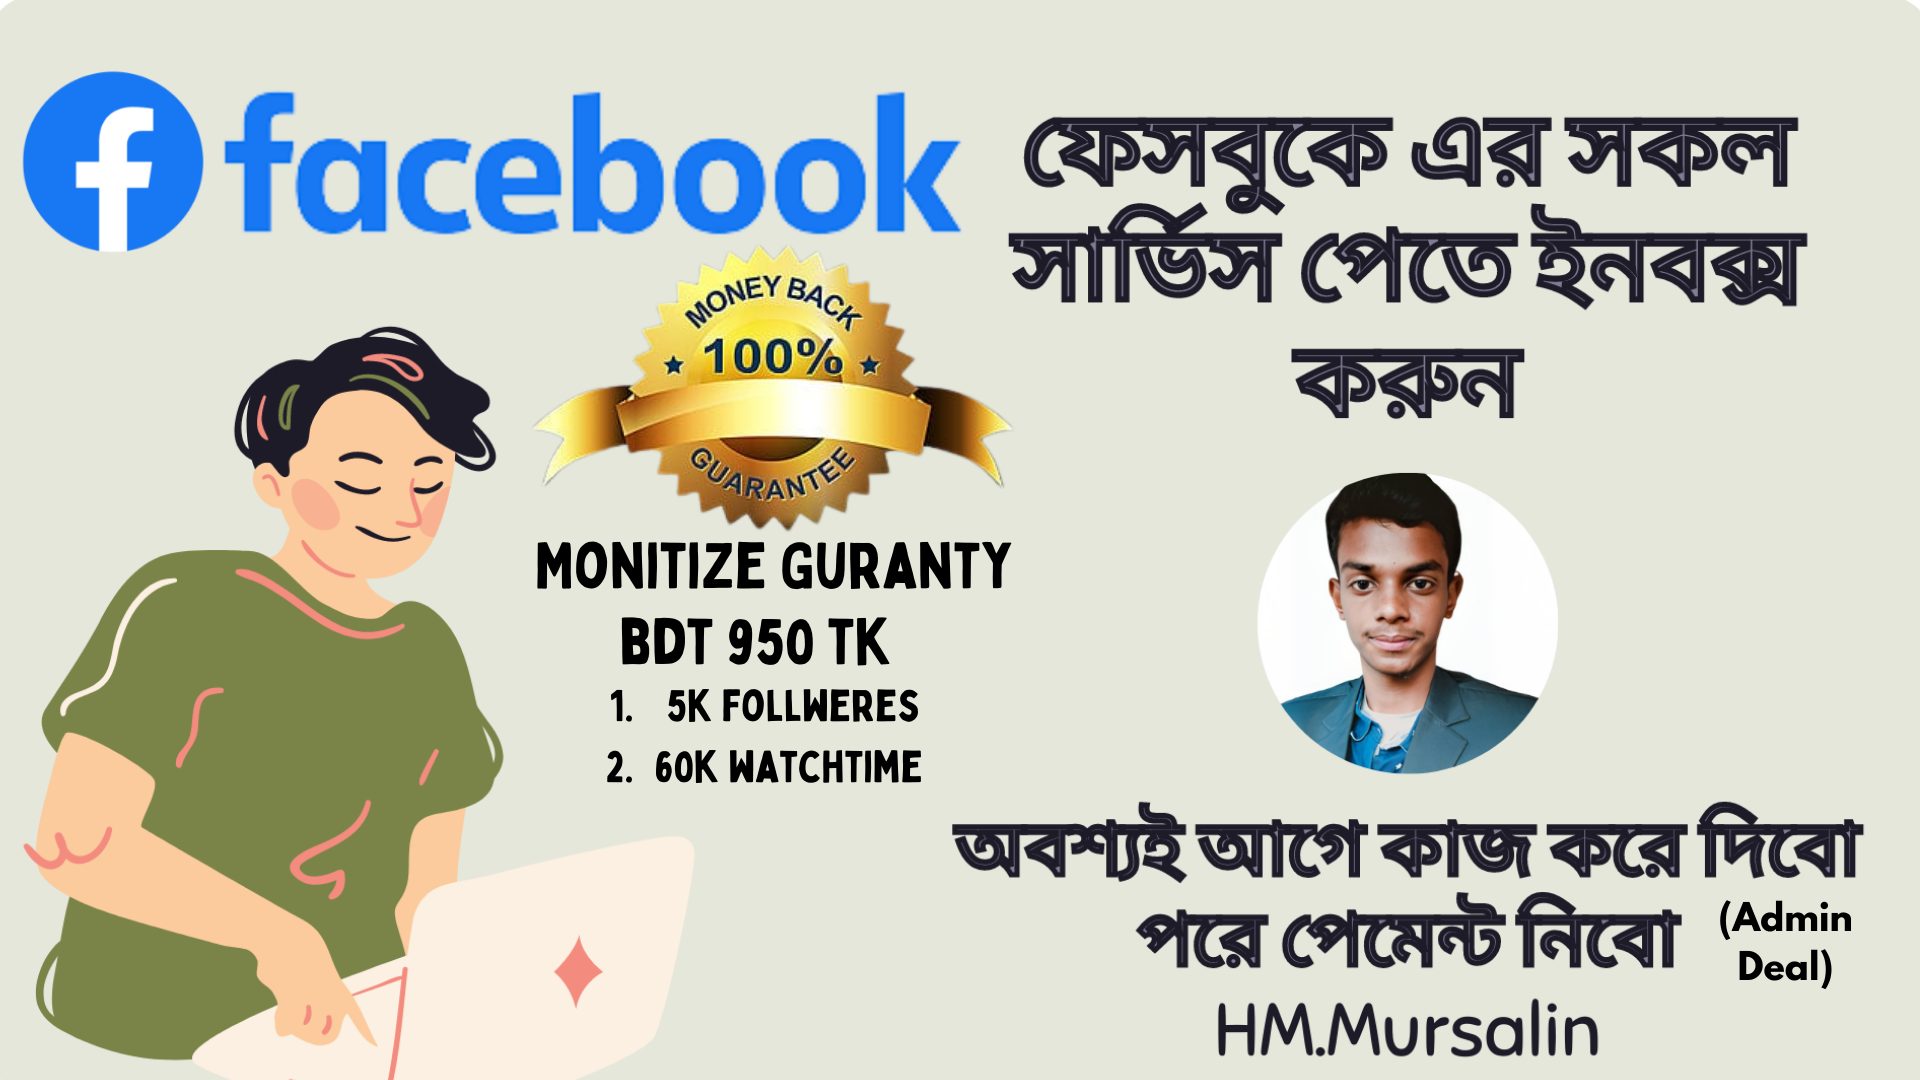 108981Facebook Pages For Sale!!!